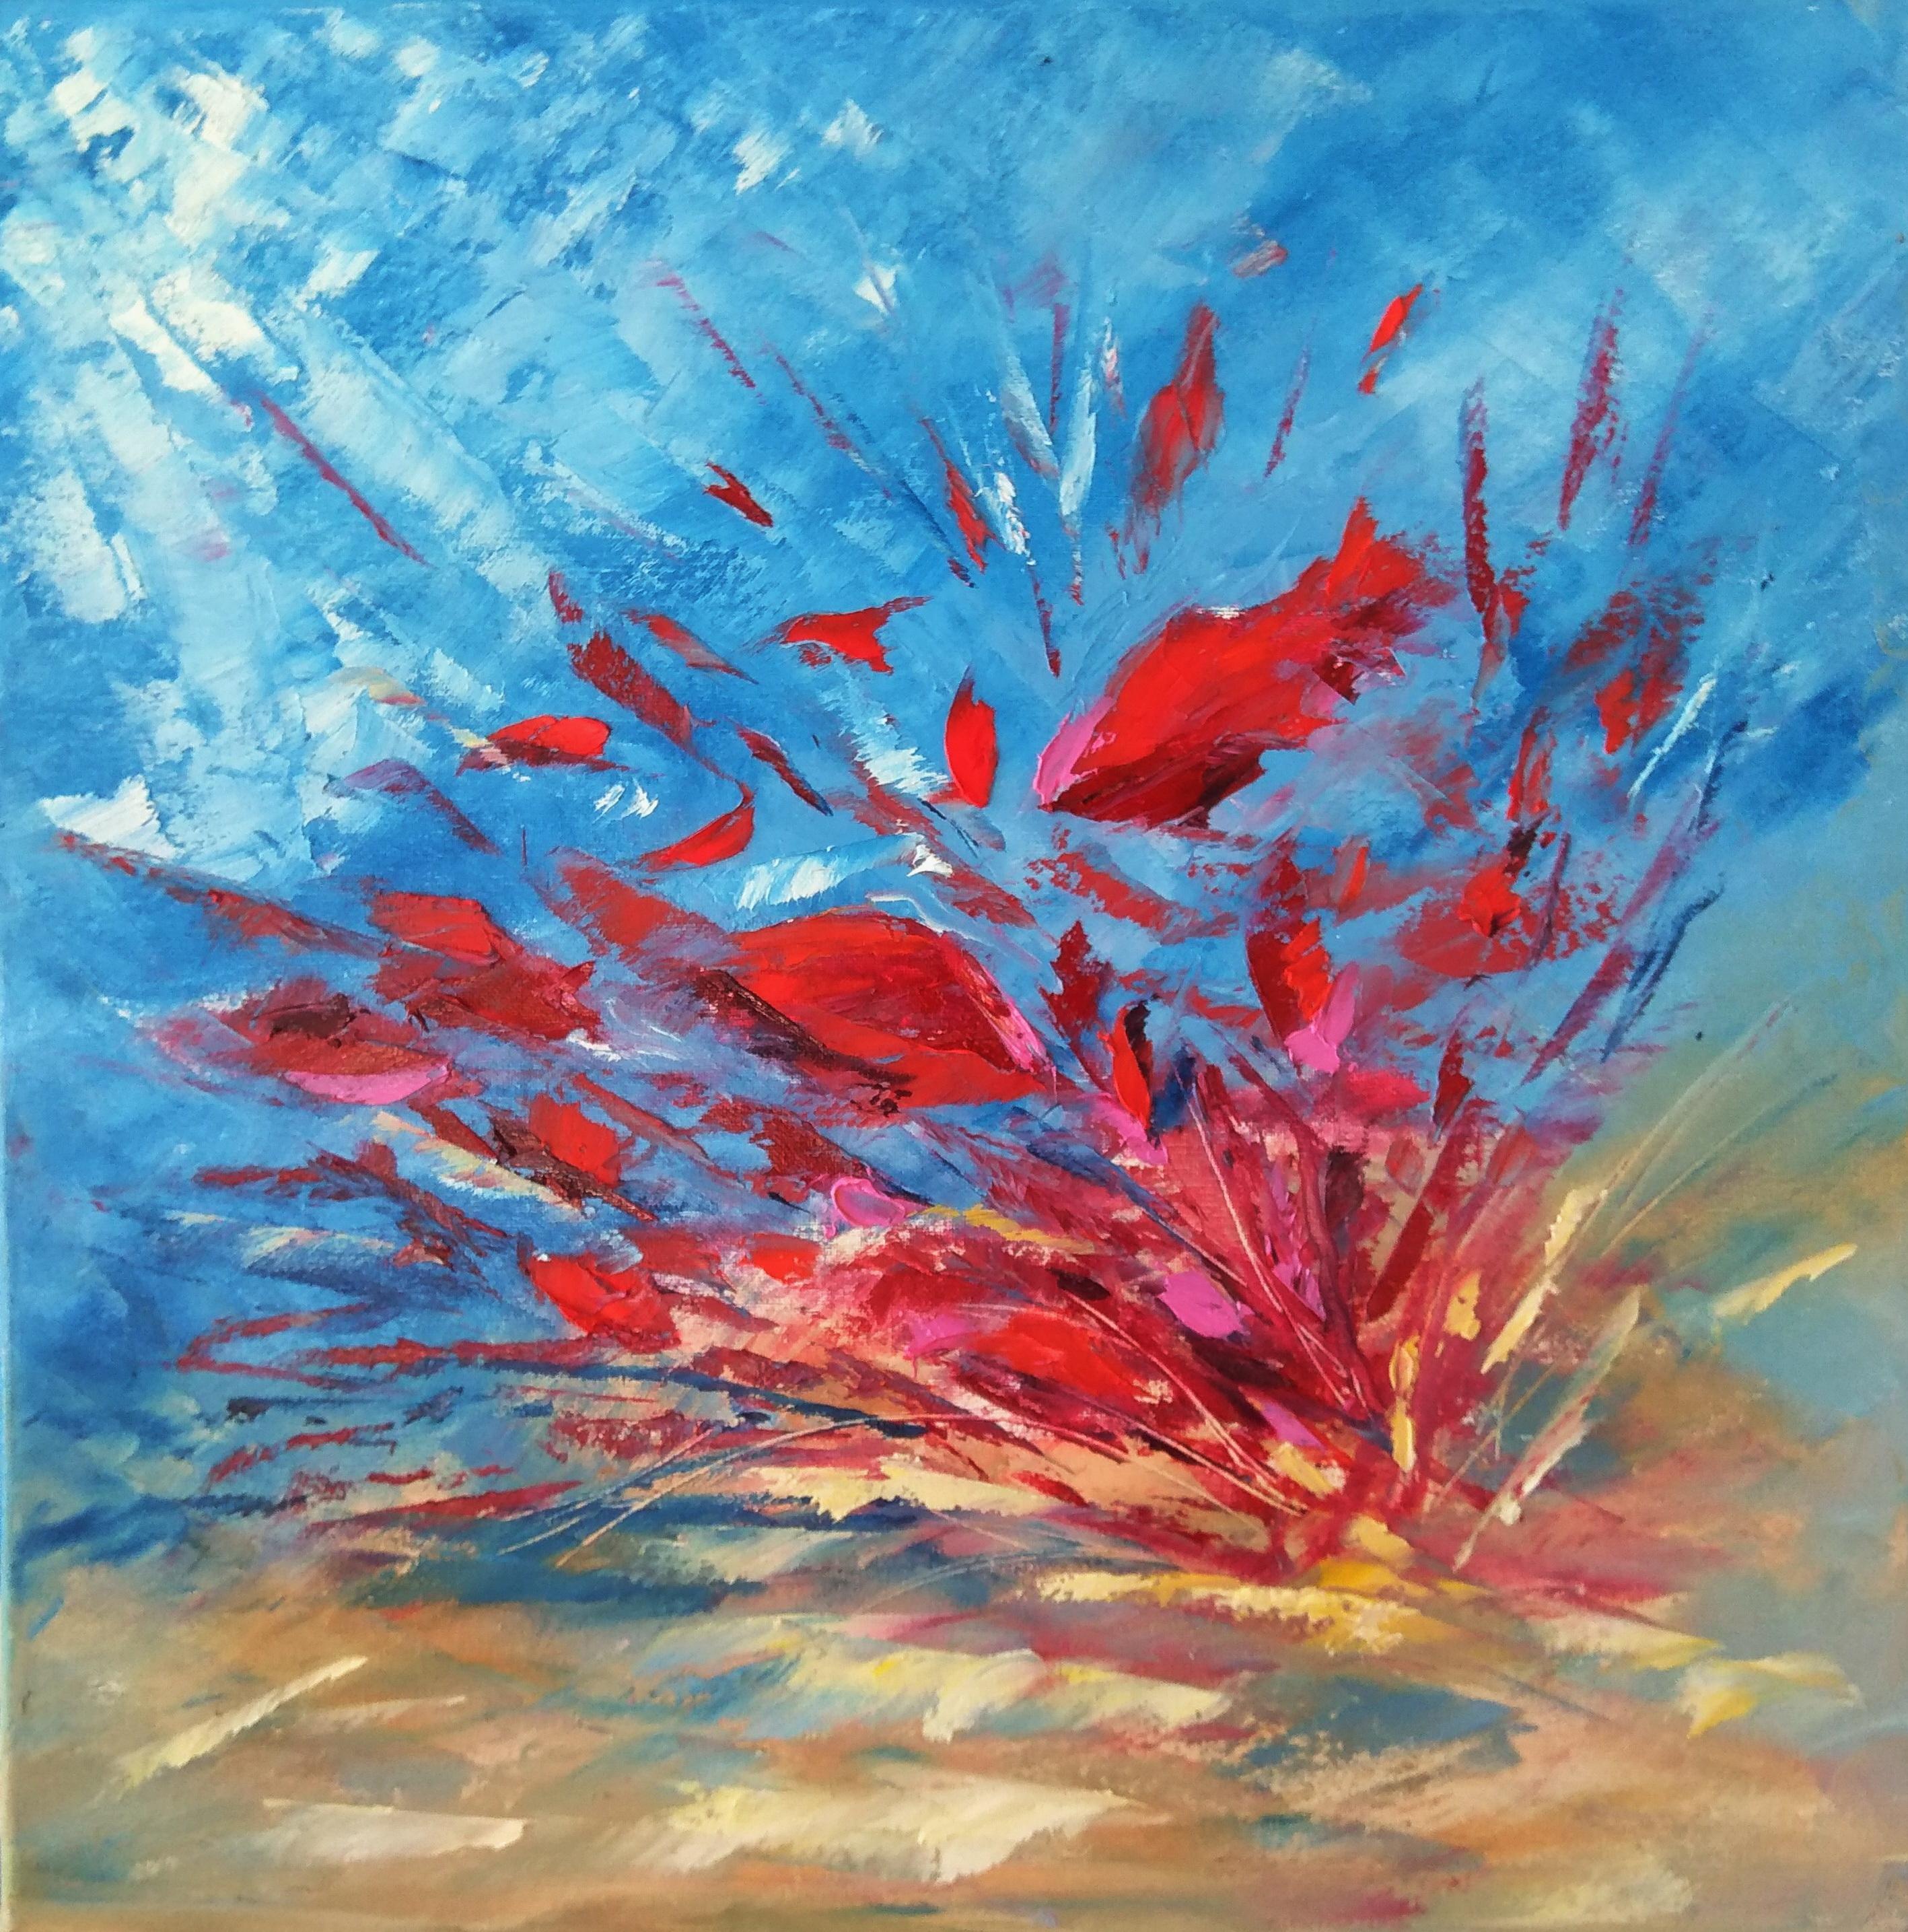 Olga Nikitina Landscape Painting - UNDERWATER PAINTING Red Expression was made underwater